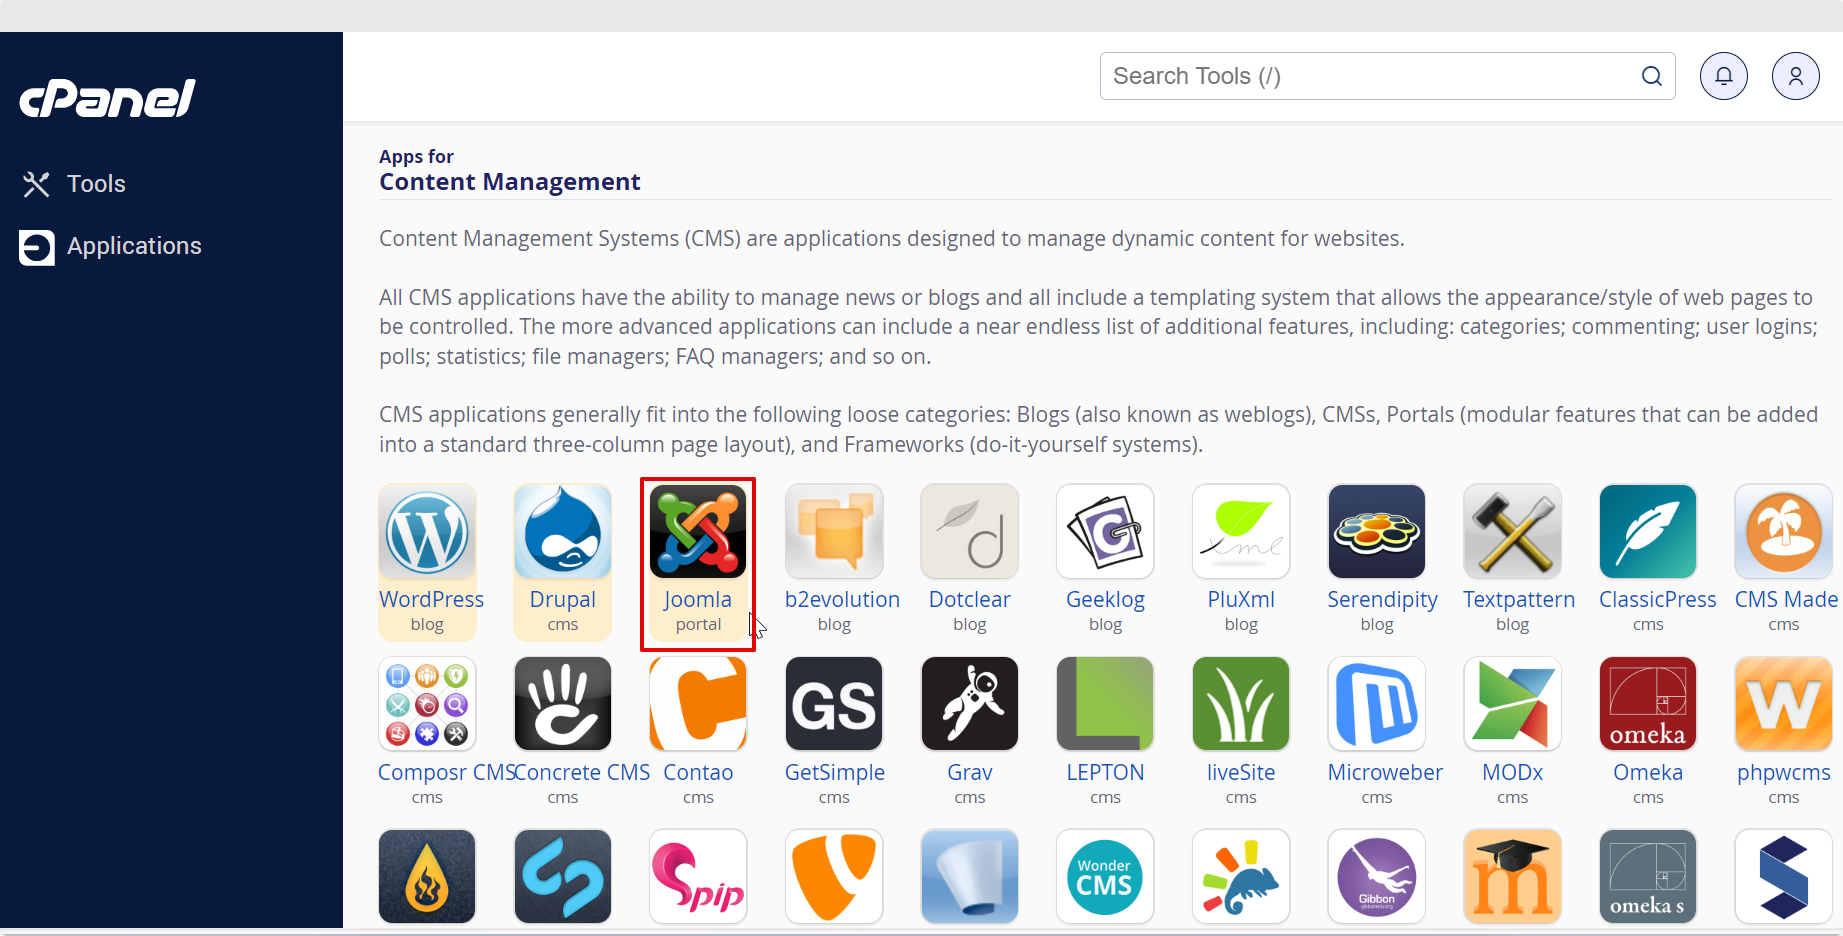 List of apps for Content Management in Installatron